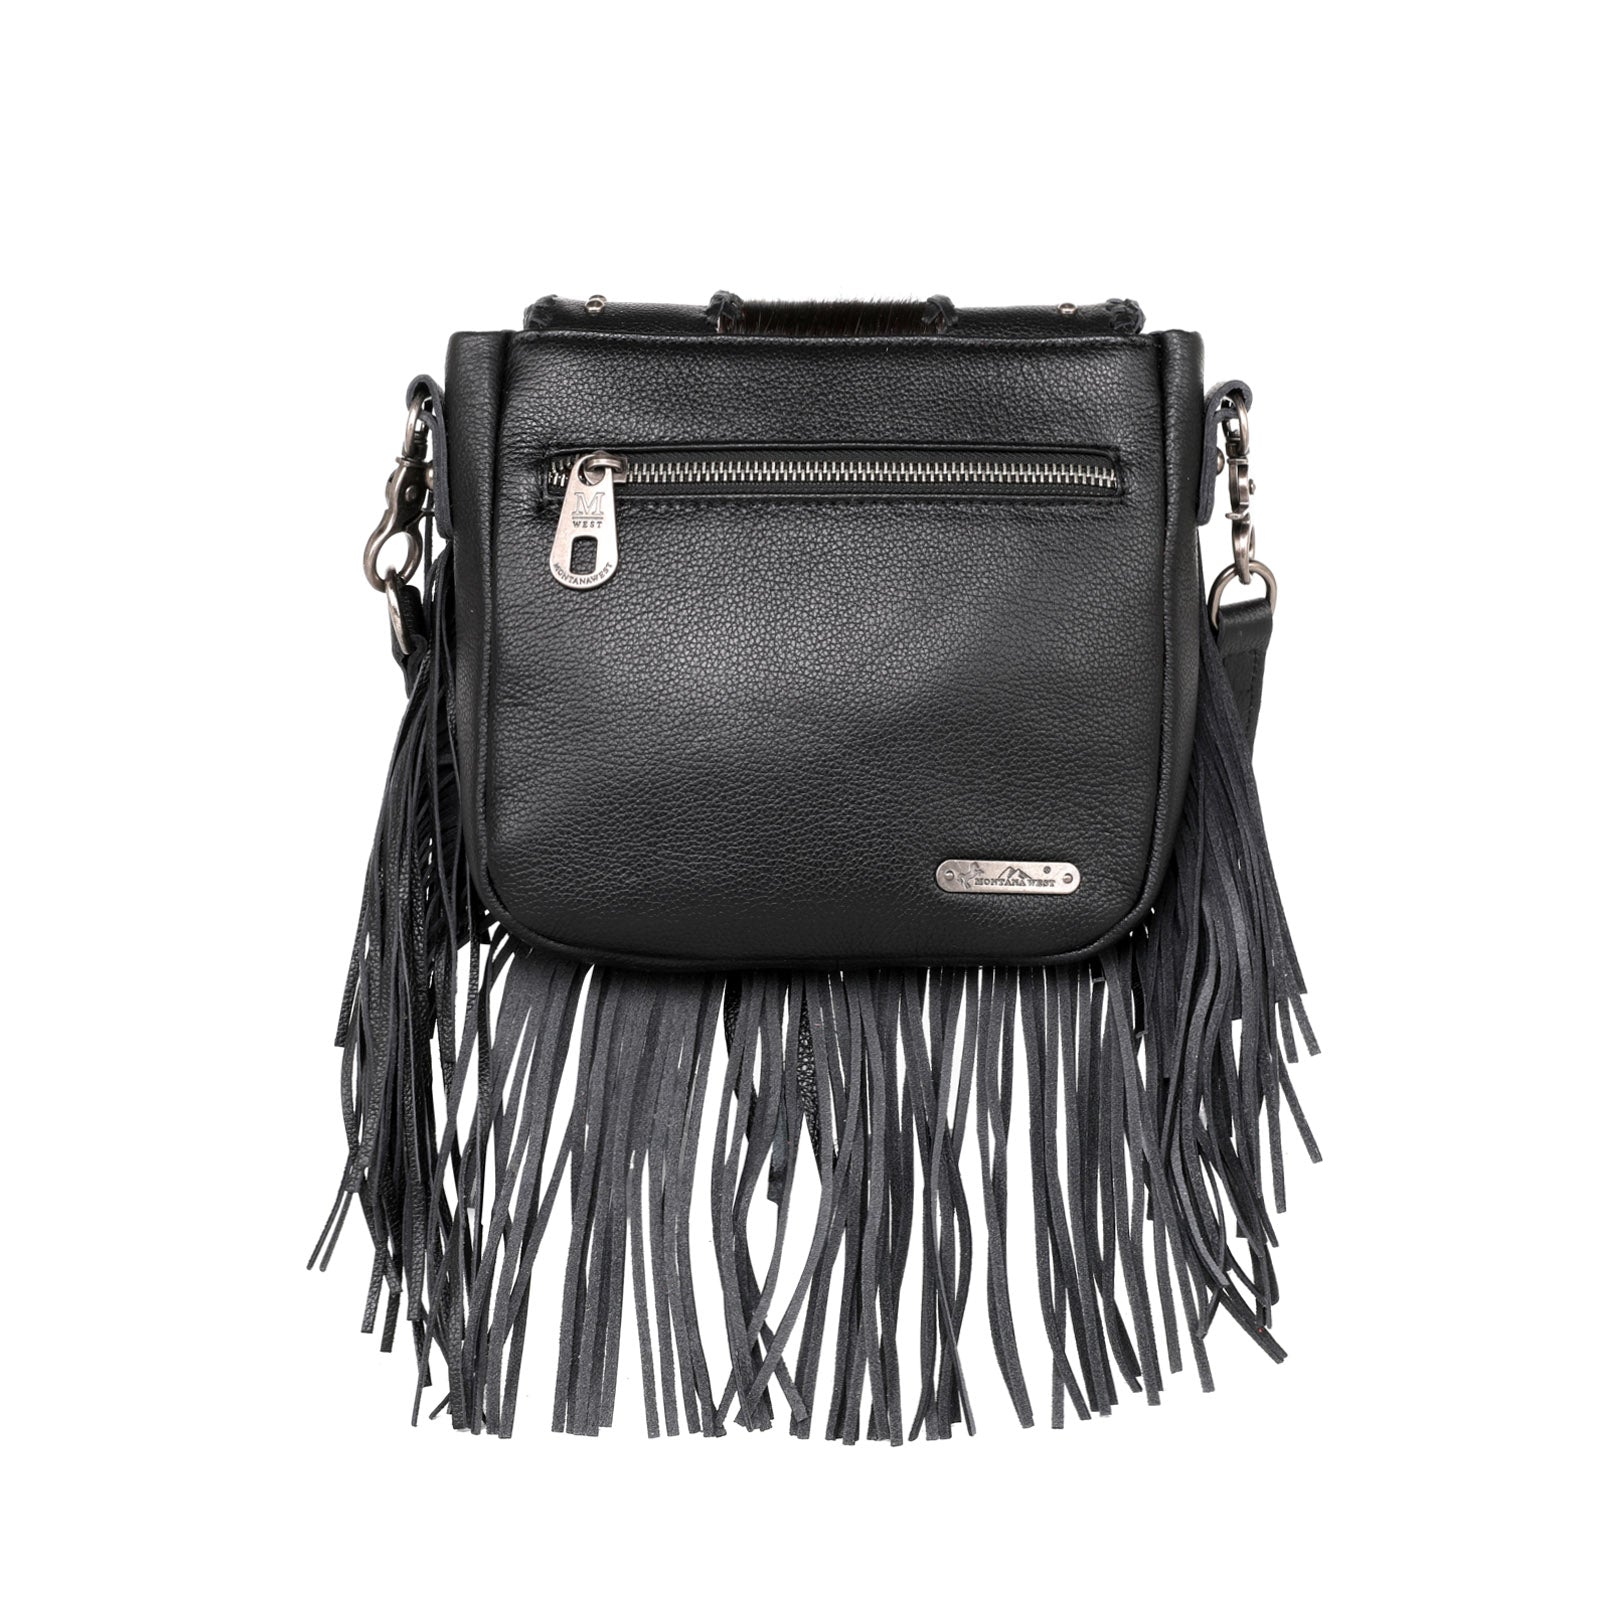 Faux axis deer cowhide bohowestern bag with long black fringe and tassel  pack up your tablet in style, cowgirl fashion